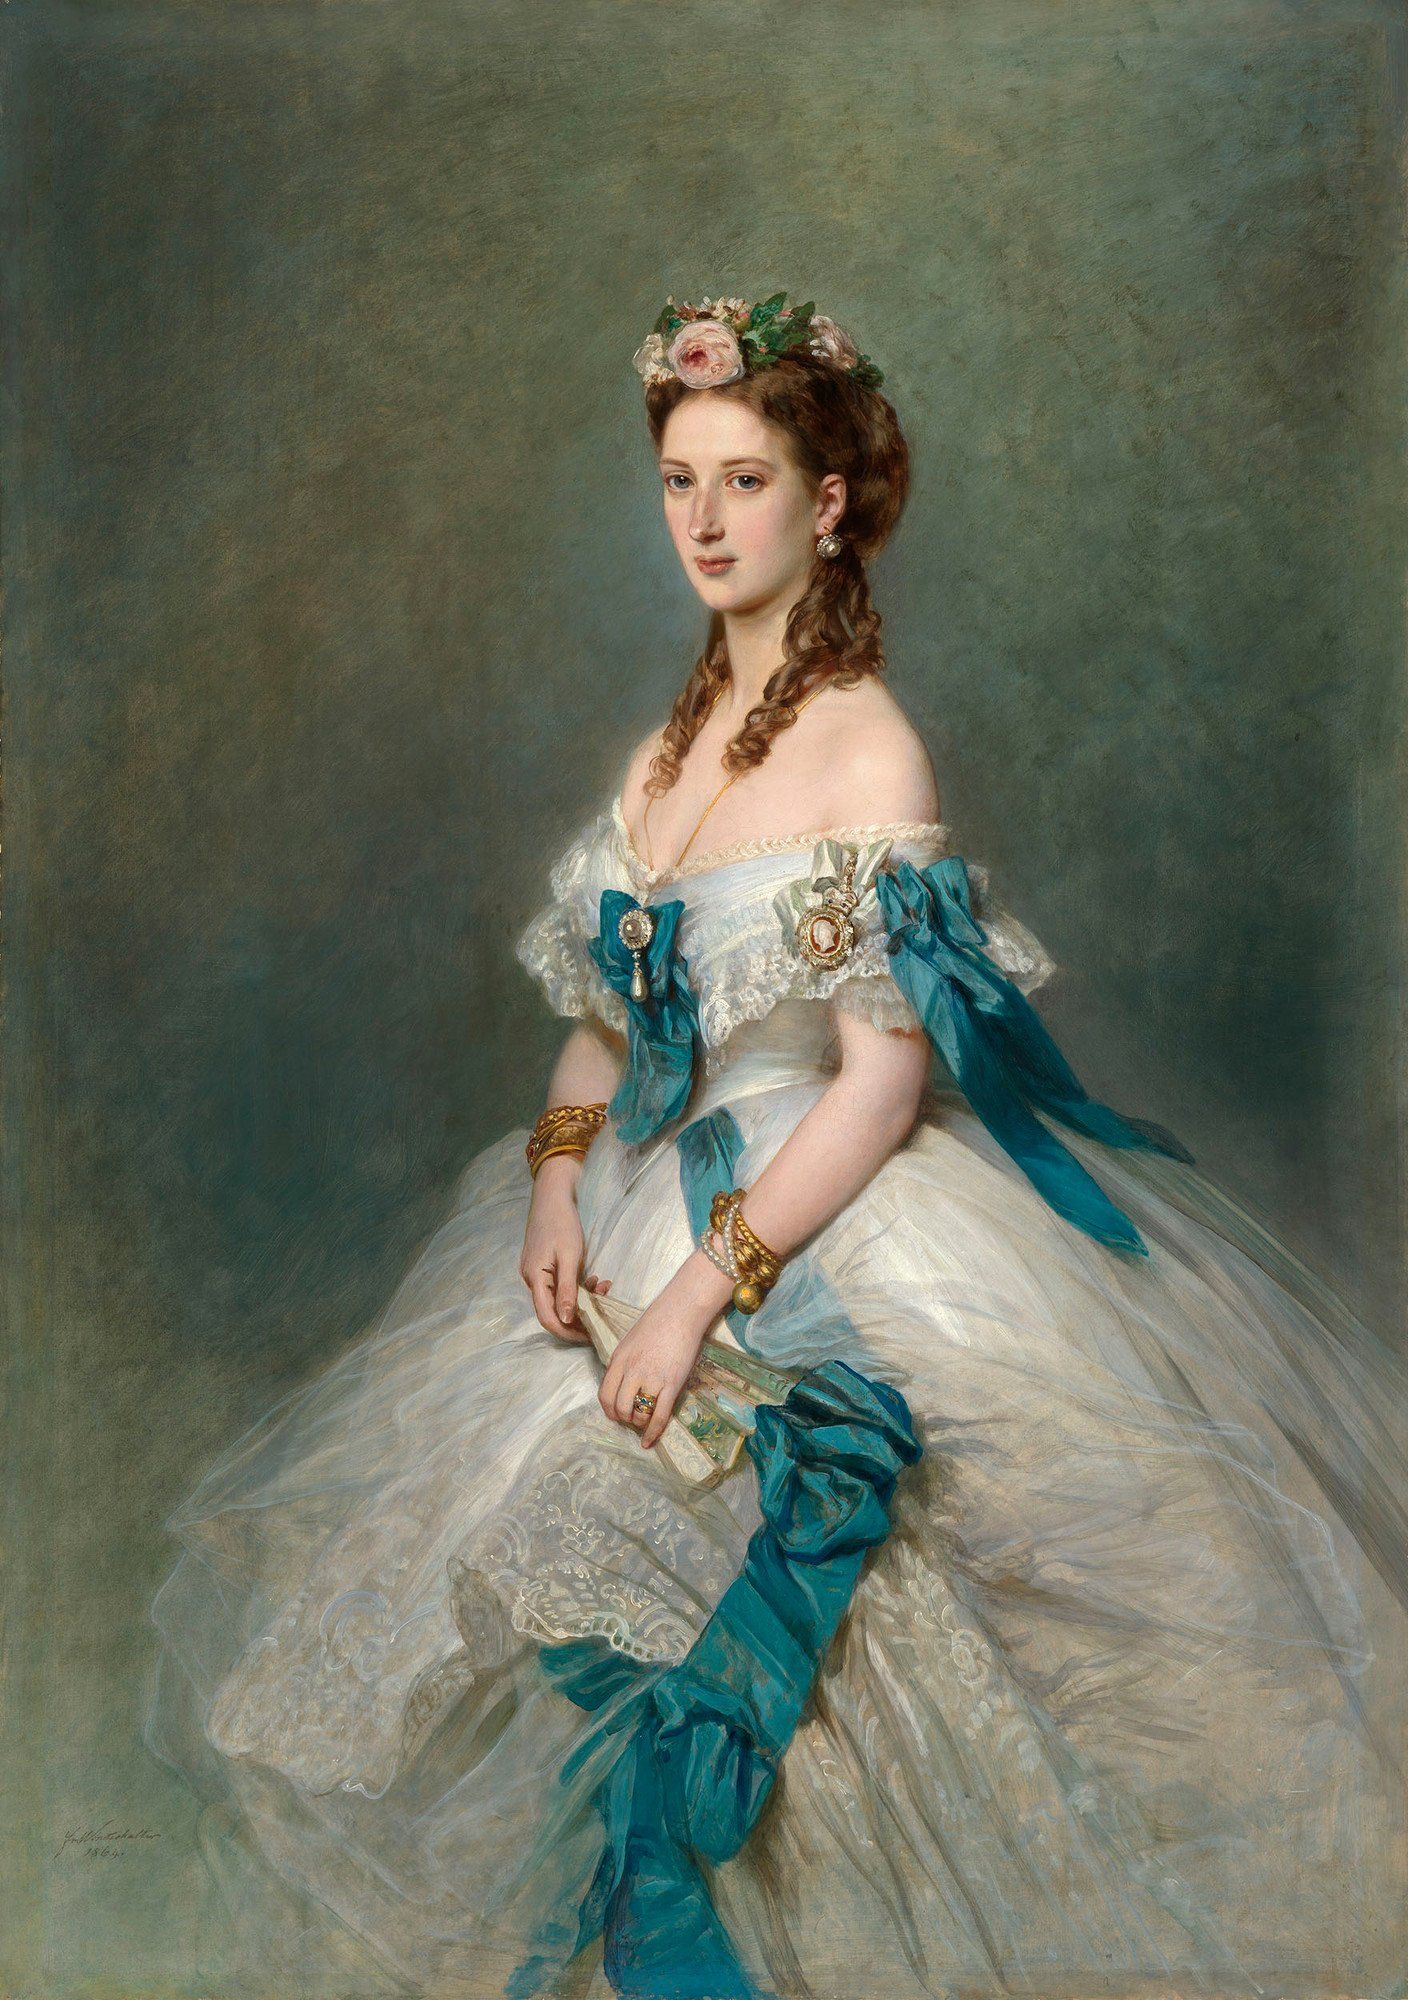 Princess Alexandra of Denmark shortly after her wedding. There looks to be a colorful ring on her left hand. Maybe it's her acrostic engagement ring? Queen Alexandra when Princess of Wales by Franz Xaver Winterhalter1864. Royal Collection Trust. 